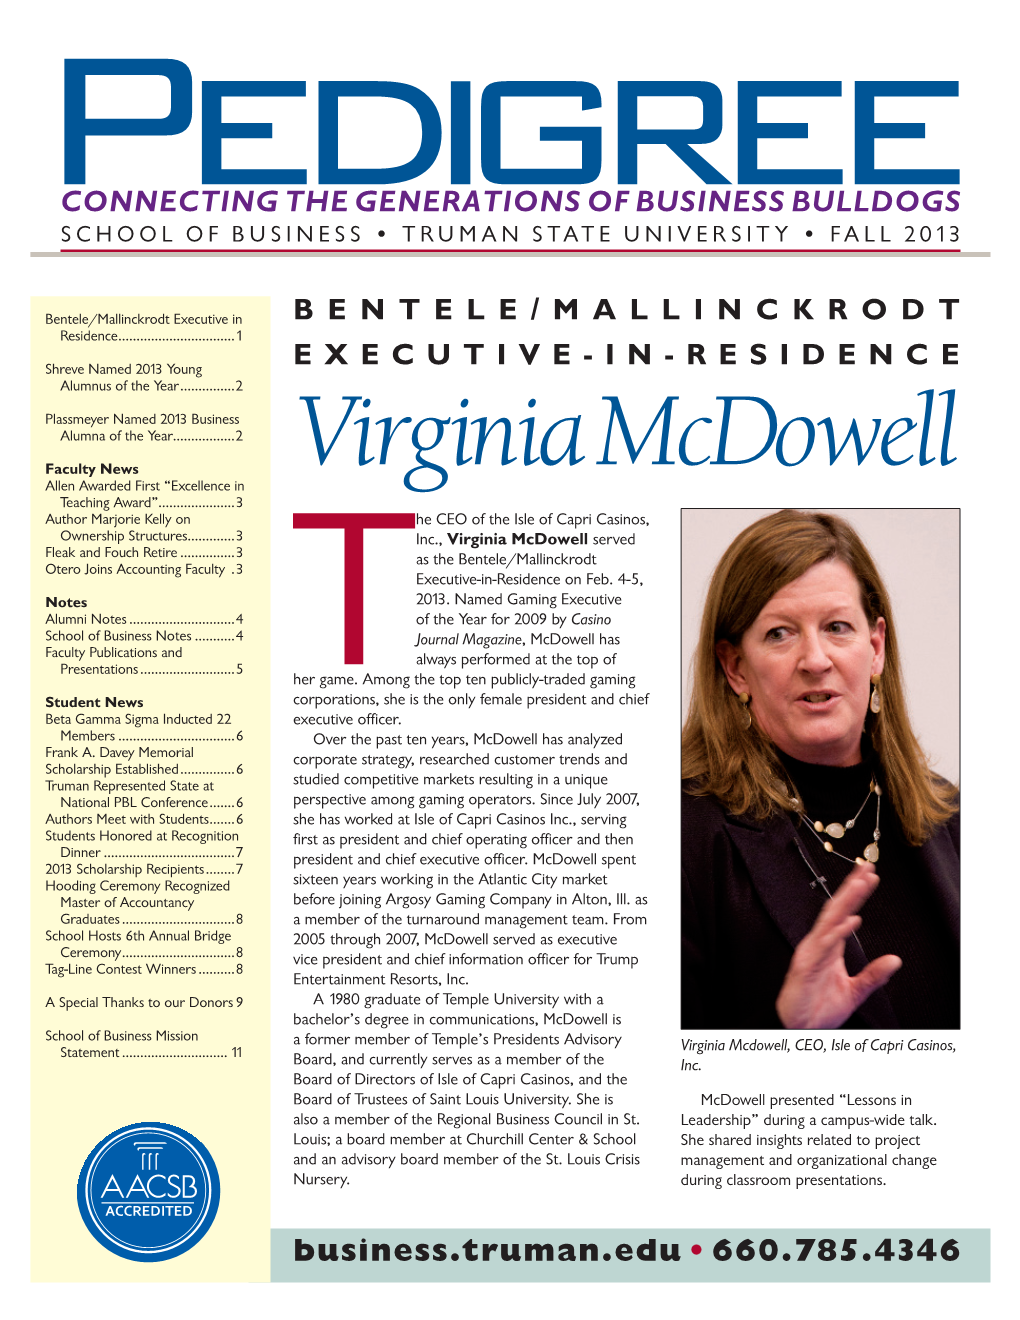 Virginia Mcdowell Allen Awarded First “Excellence in Teaching Award”